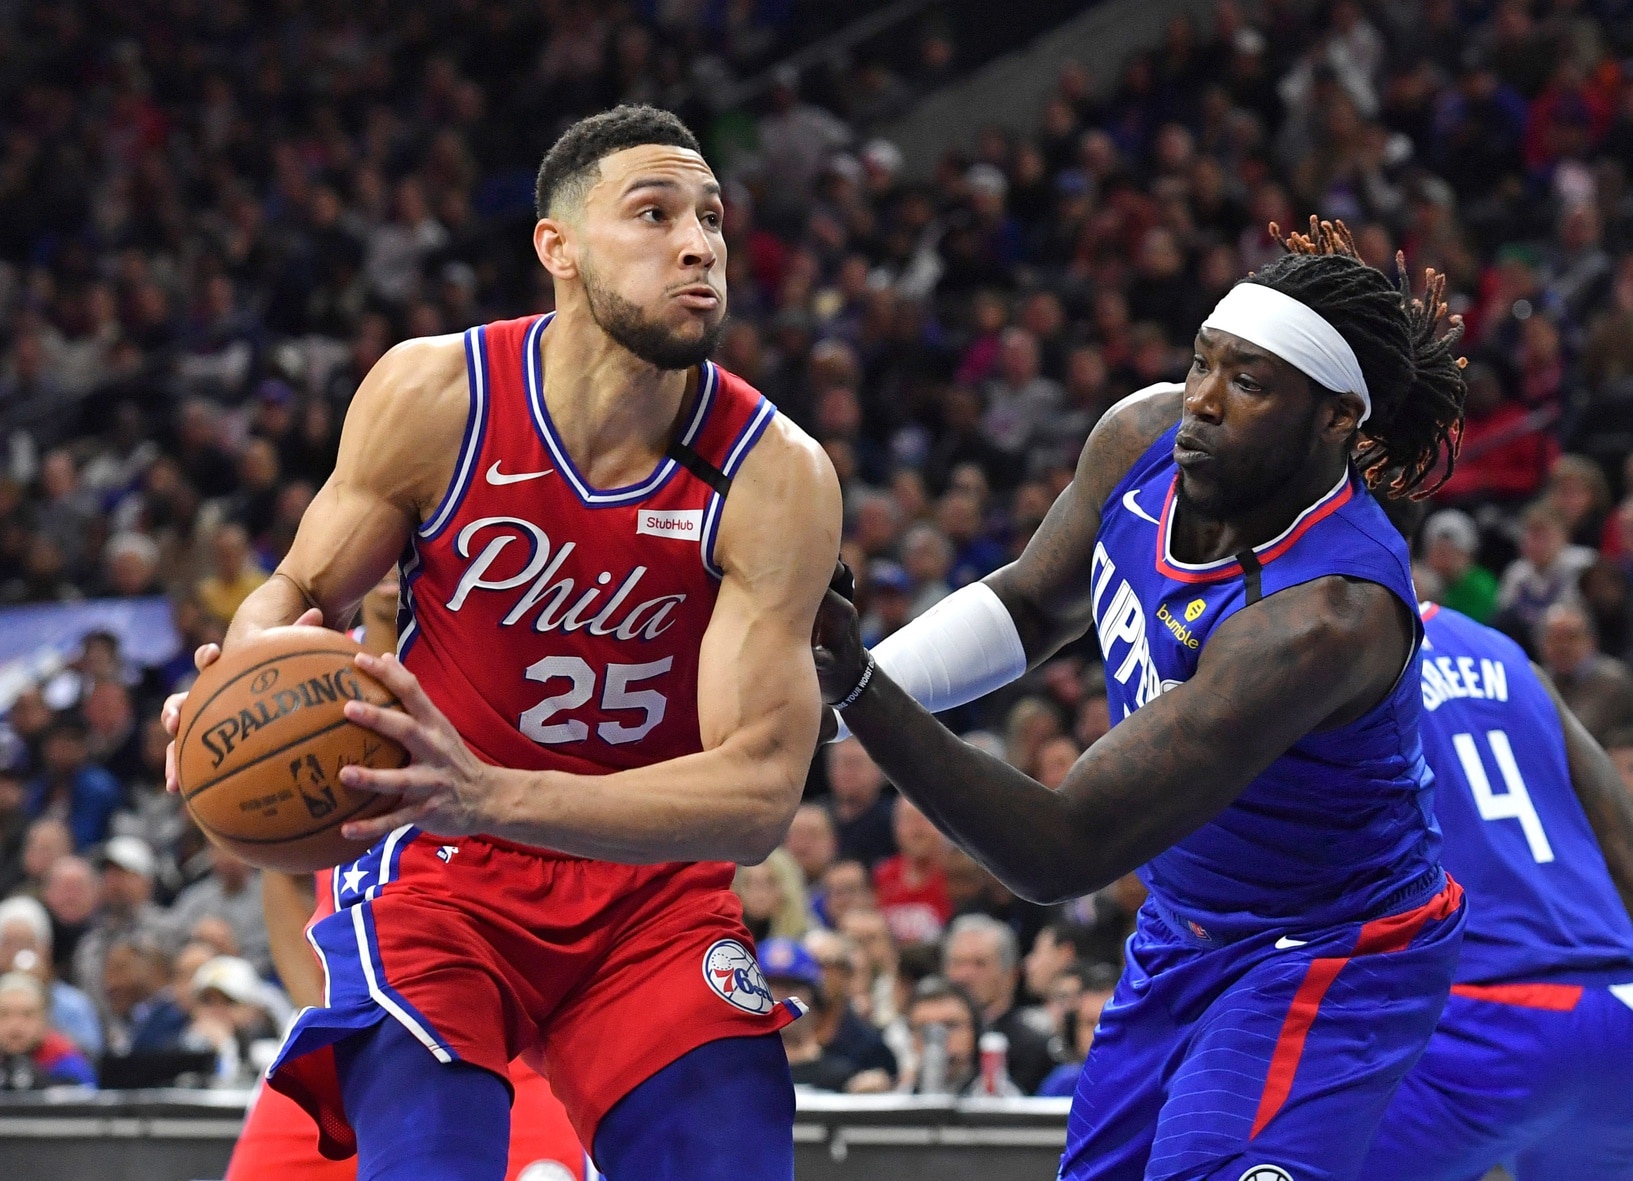 Tom Moore Reports Sixers Expect Ben Simmons to Play For Philadelphia in 2021-2022